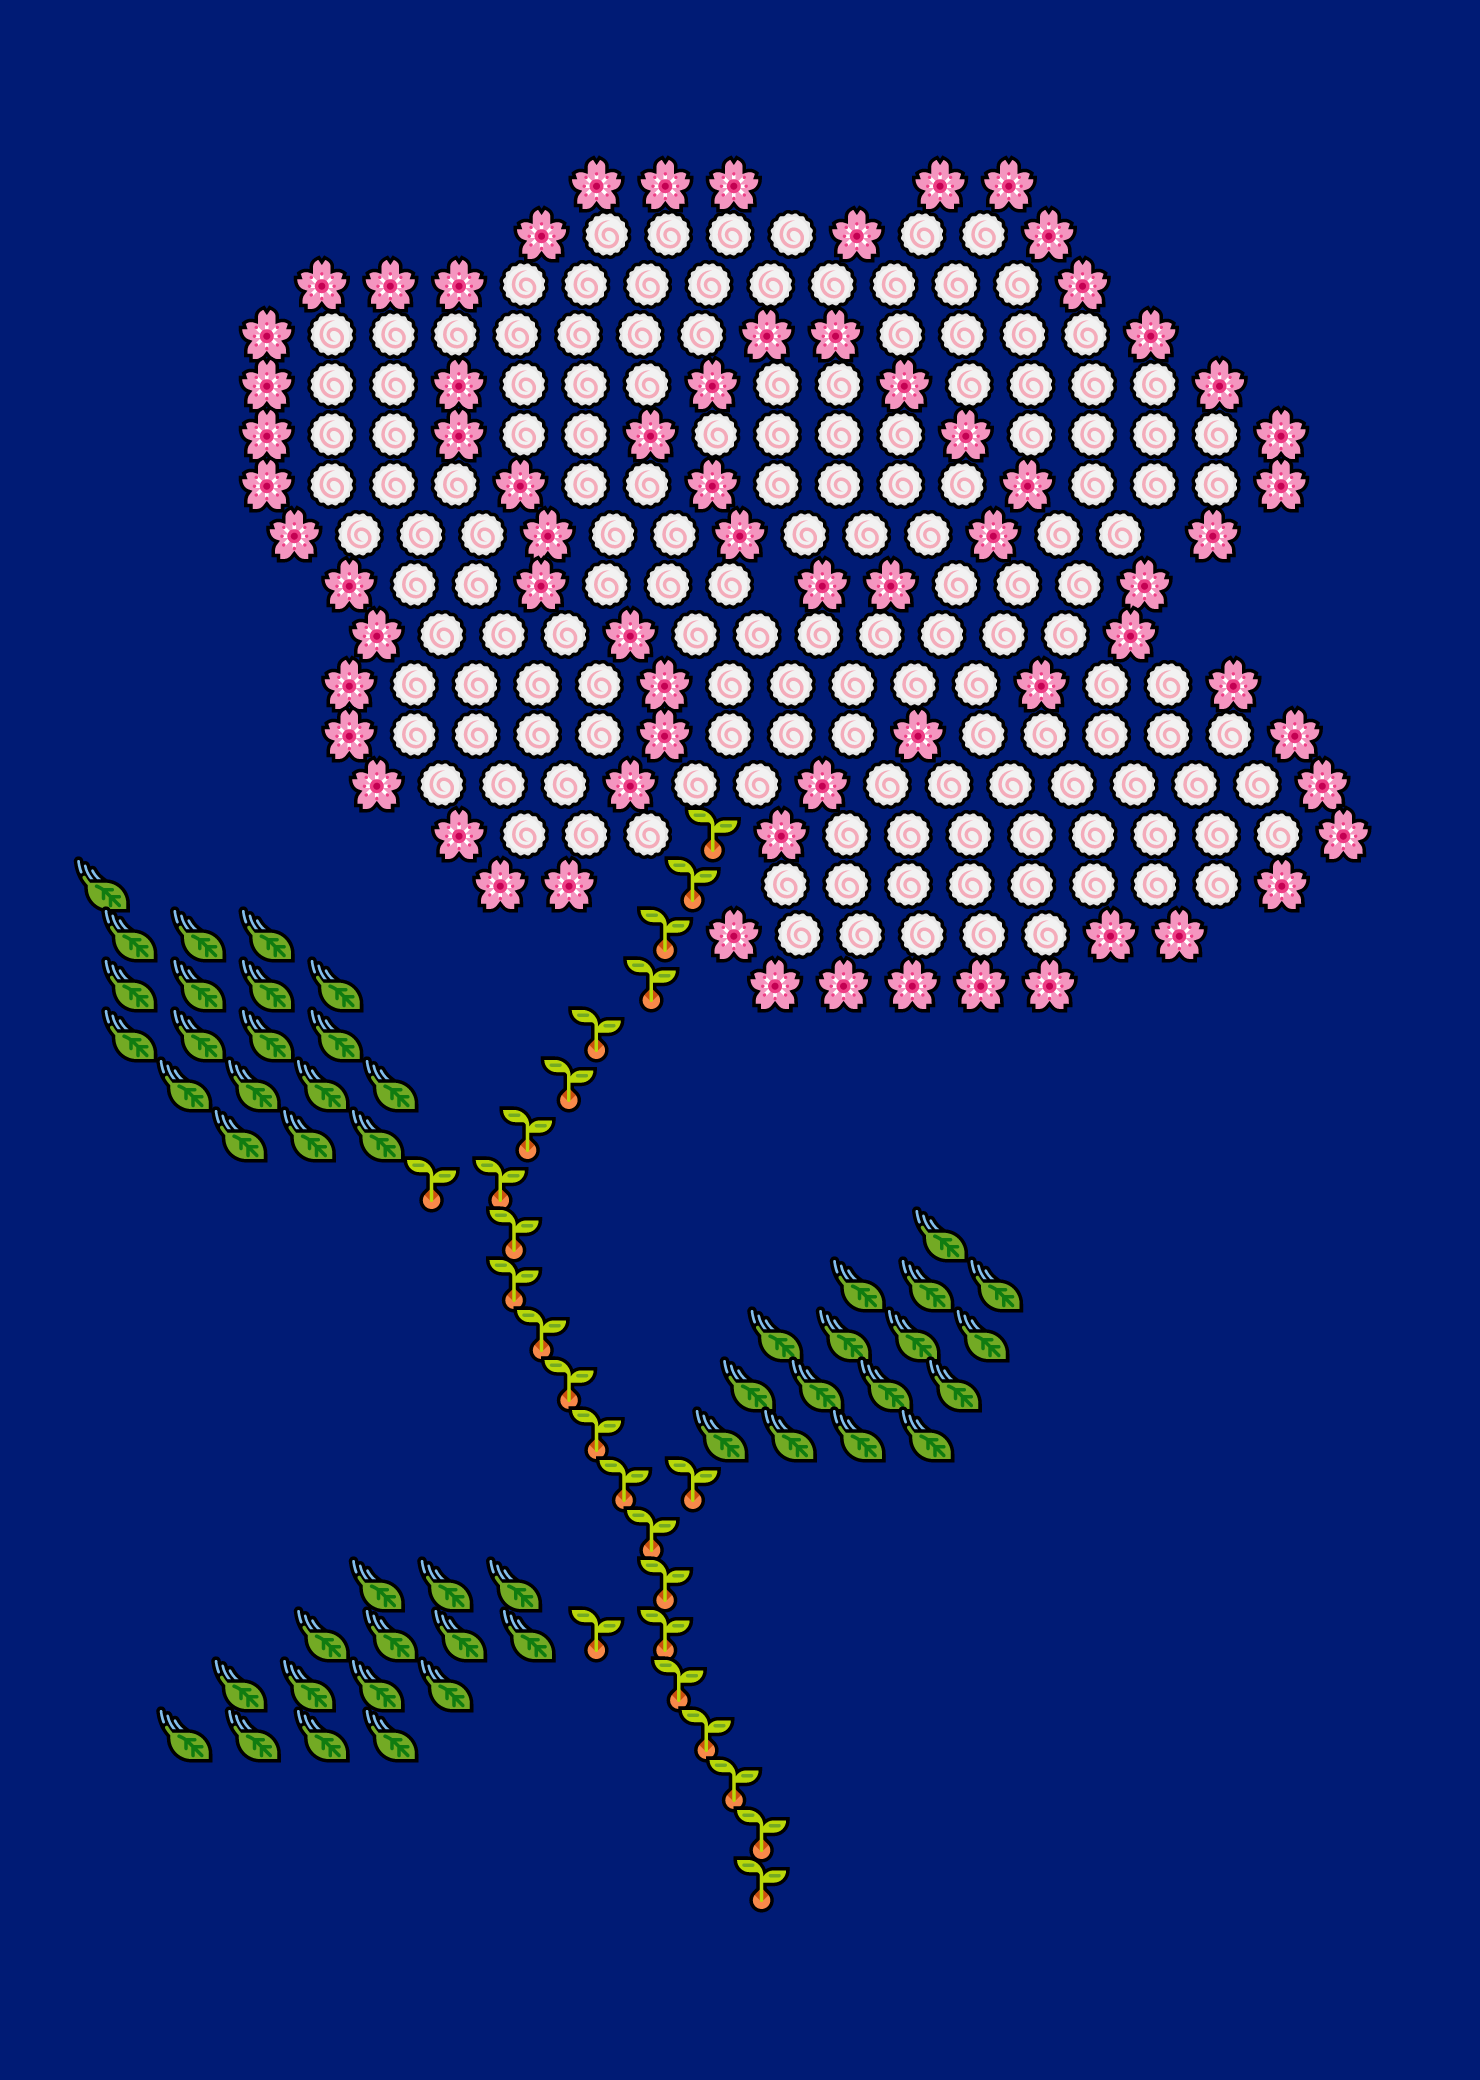 In this example, we paint a rose from just four Unicode pictograms. We use the "cherry blossom" and "fish cake" icons for the rose petals, "seedling" icon for the stem, and "leaf fluttering in wind" for the leaves. We place the flower on a large navy-blue canvas measuring 1400 by 2000 pixels and add a padding of 40 pixels around it. We align the rose to the middle of the image and set the Monospace font for the icons.